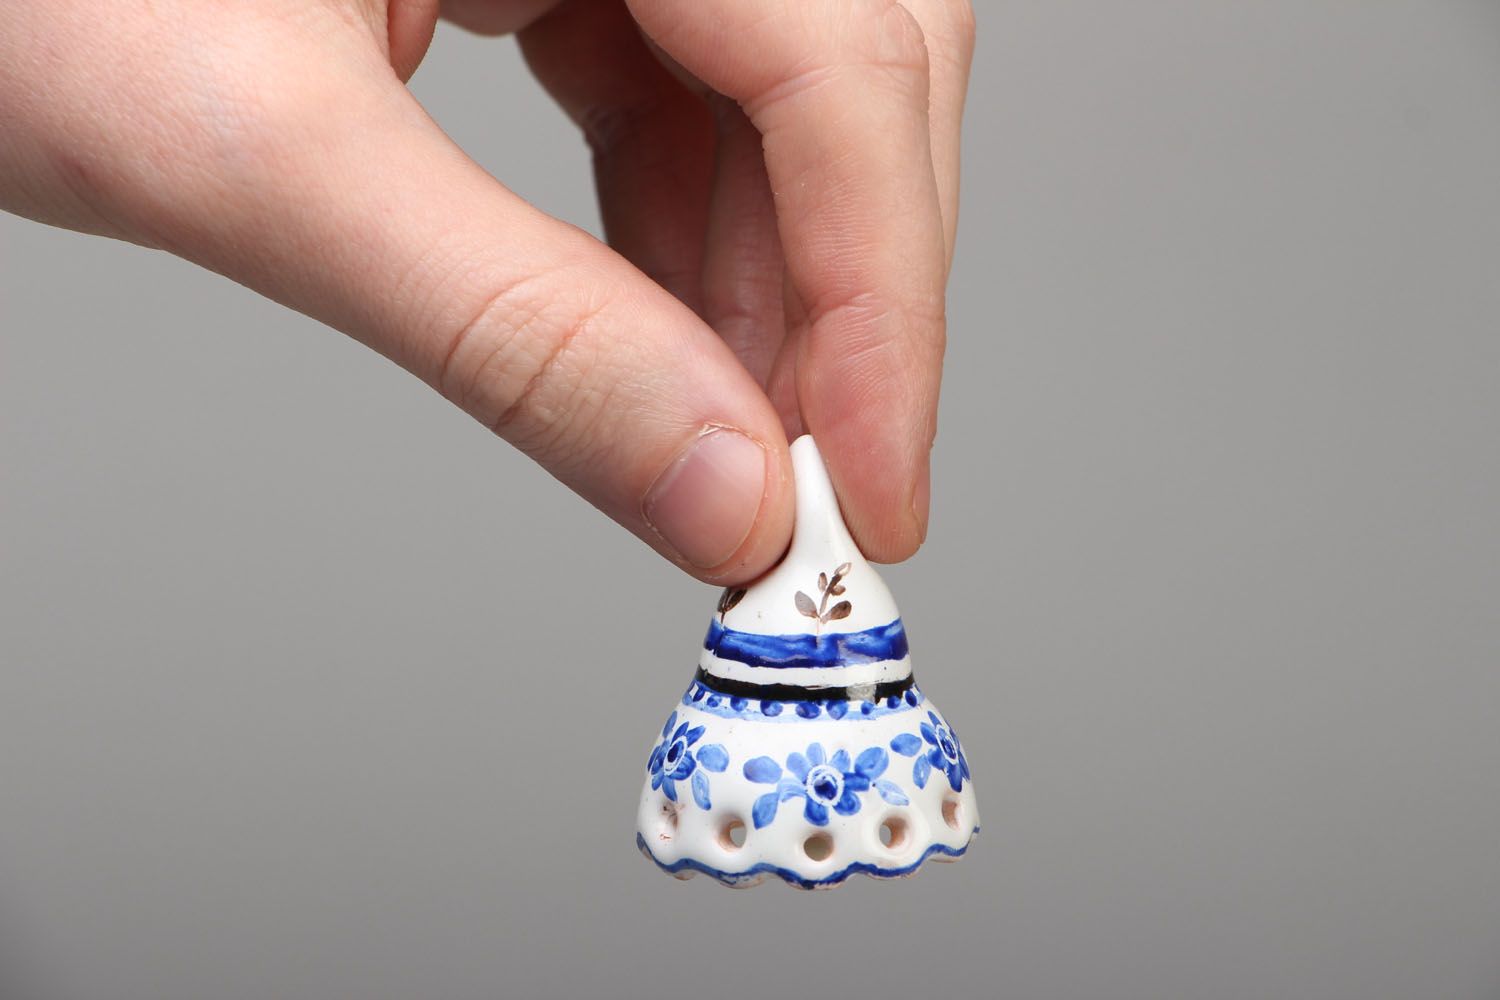 Painted ceramic bell photo 4